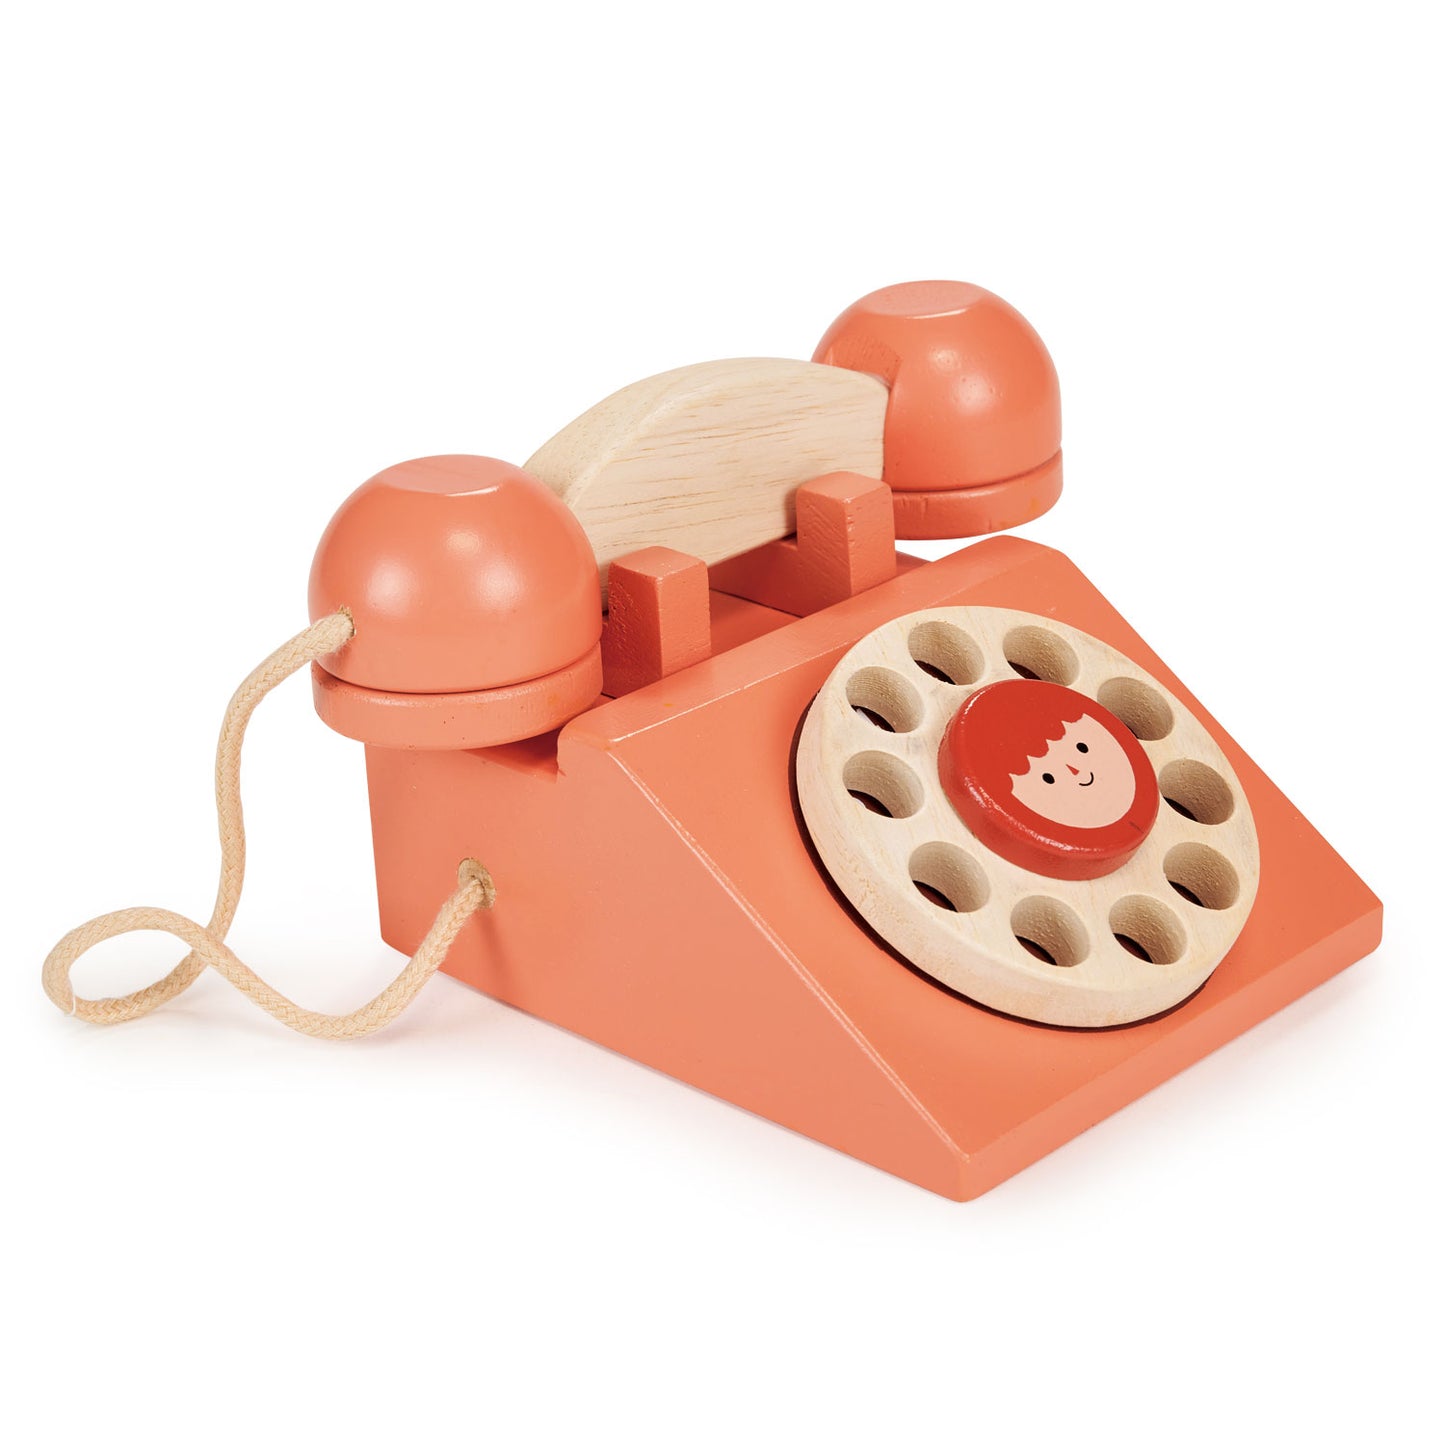 Ring ring wooden telephone by Mentari